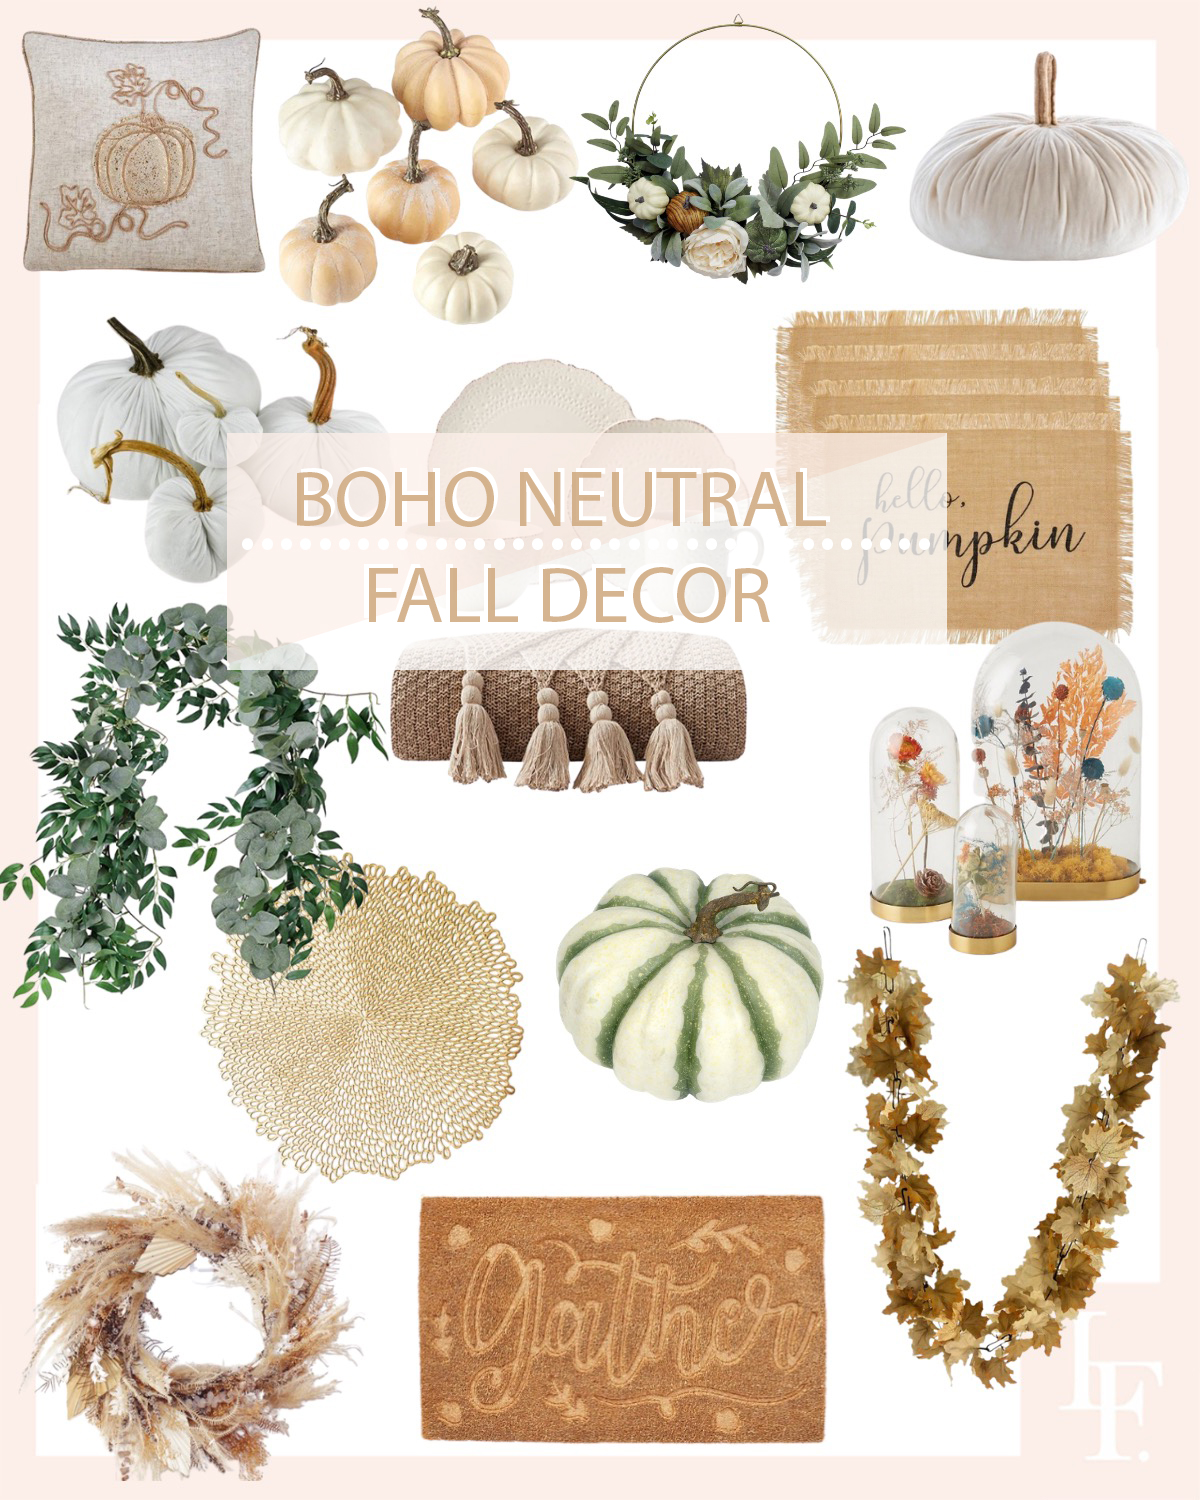 The best boho neutral fall décor for your home, featured by San Francisco blogger Lombard & Fifth.